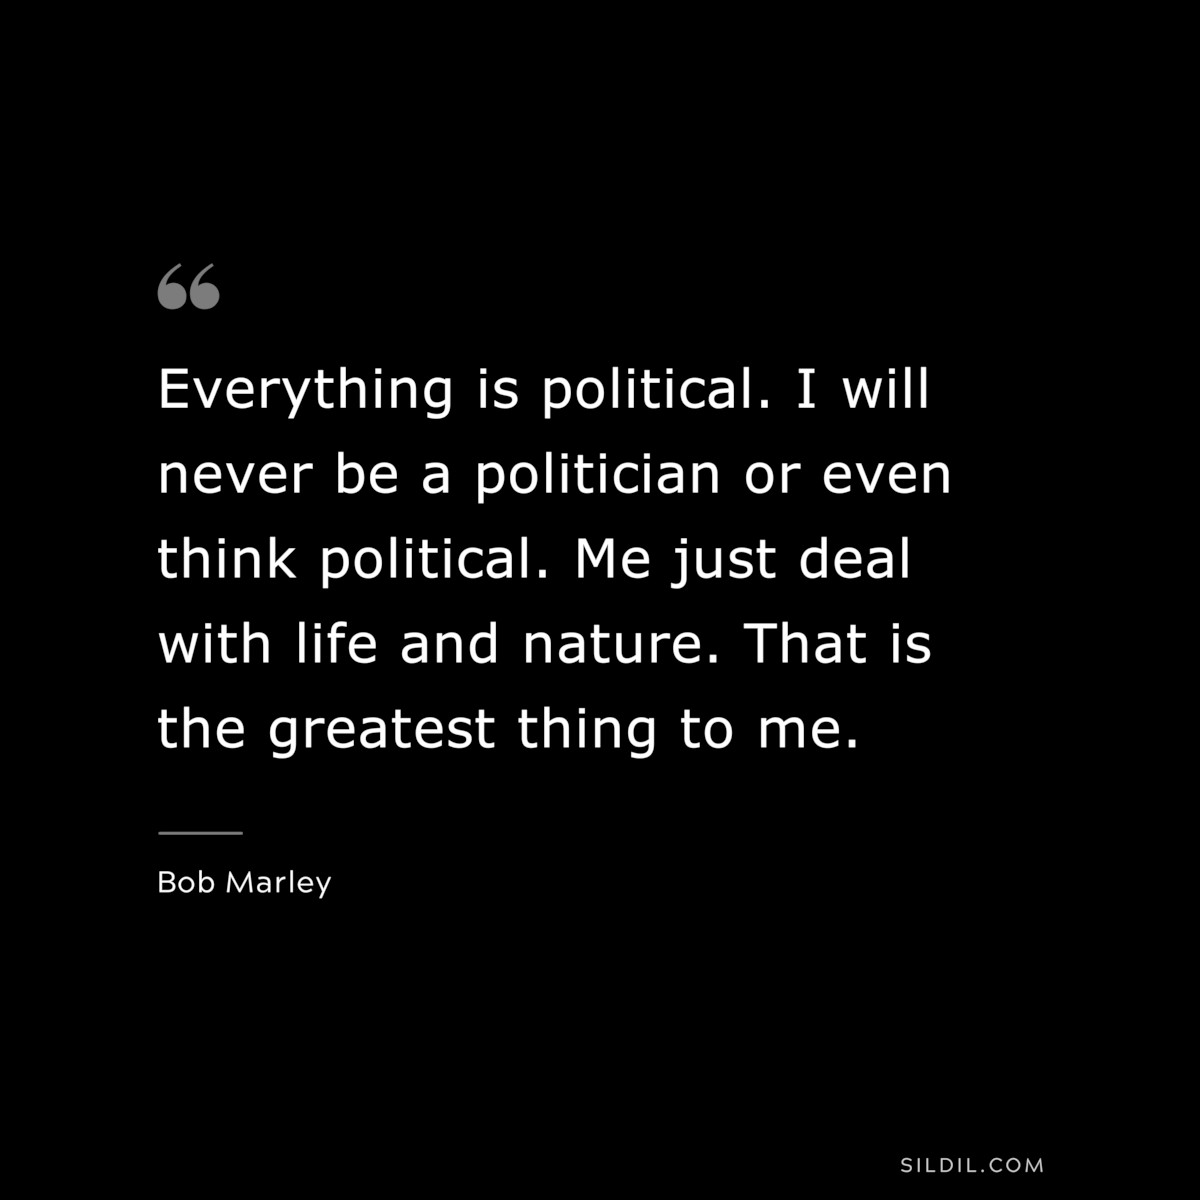 Everything is political. I will never be a politician or even think political. Me just deal with life and nature. That is the greatest thing to me. ― Bob Marley